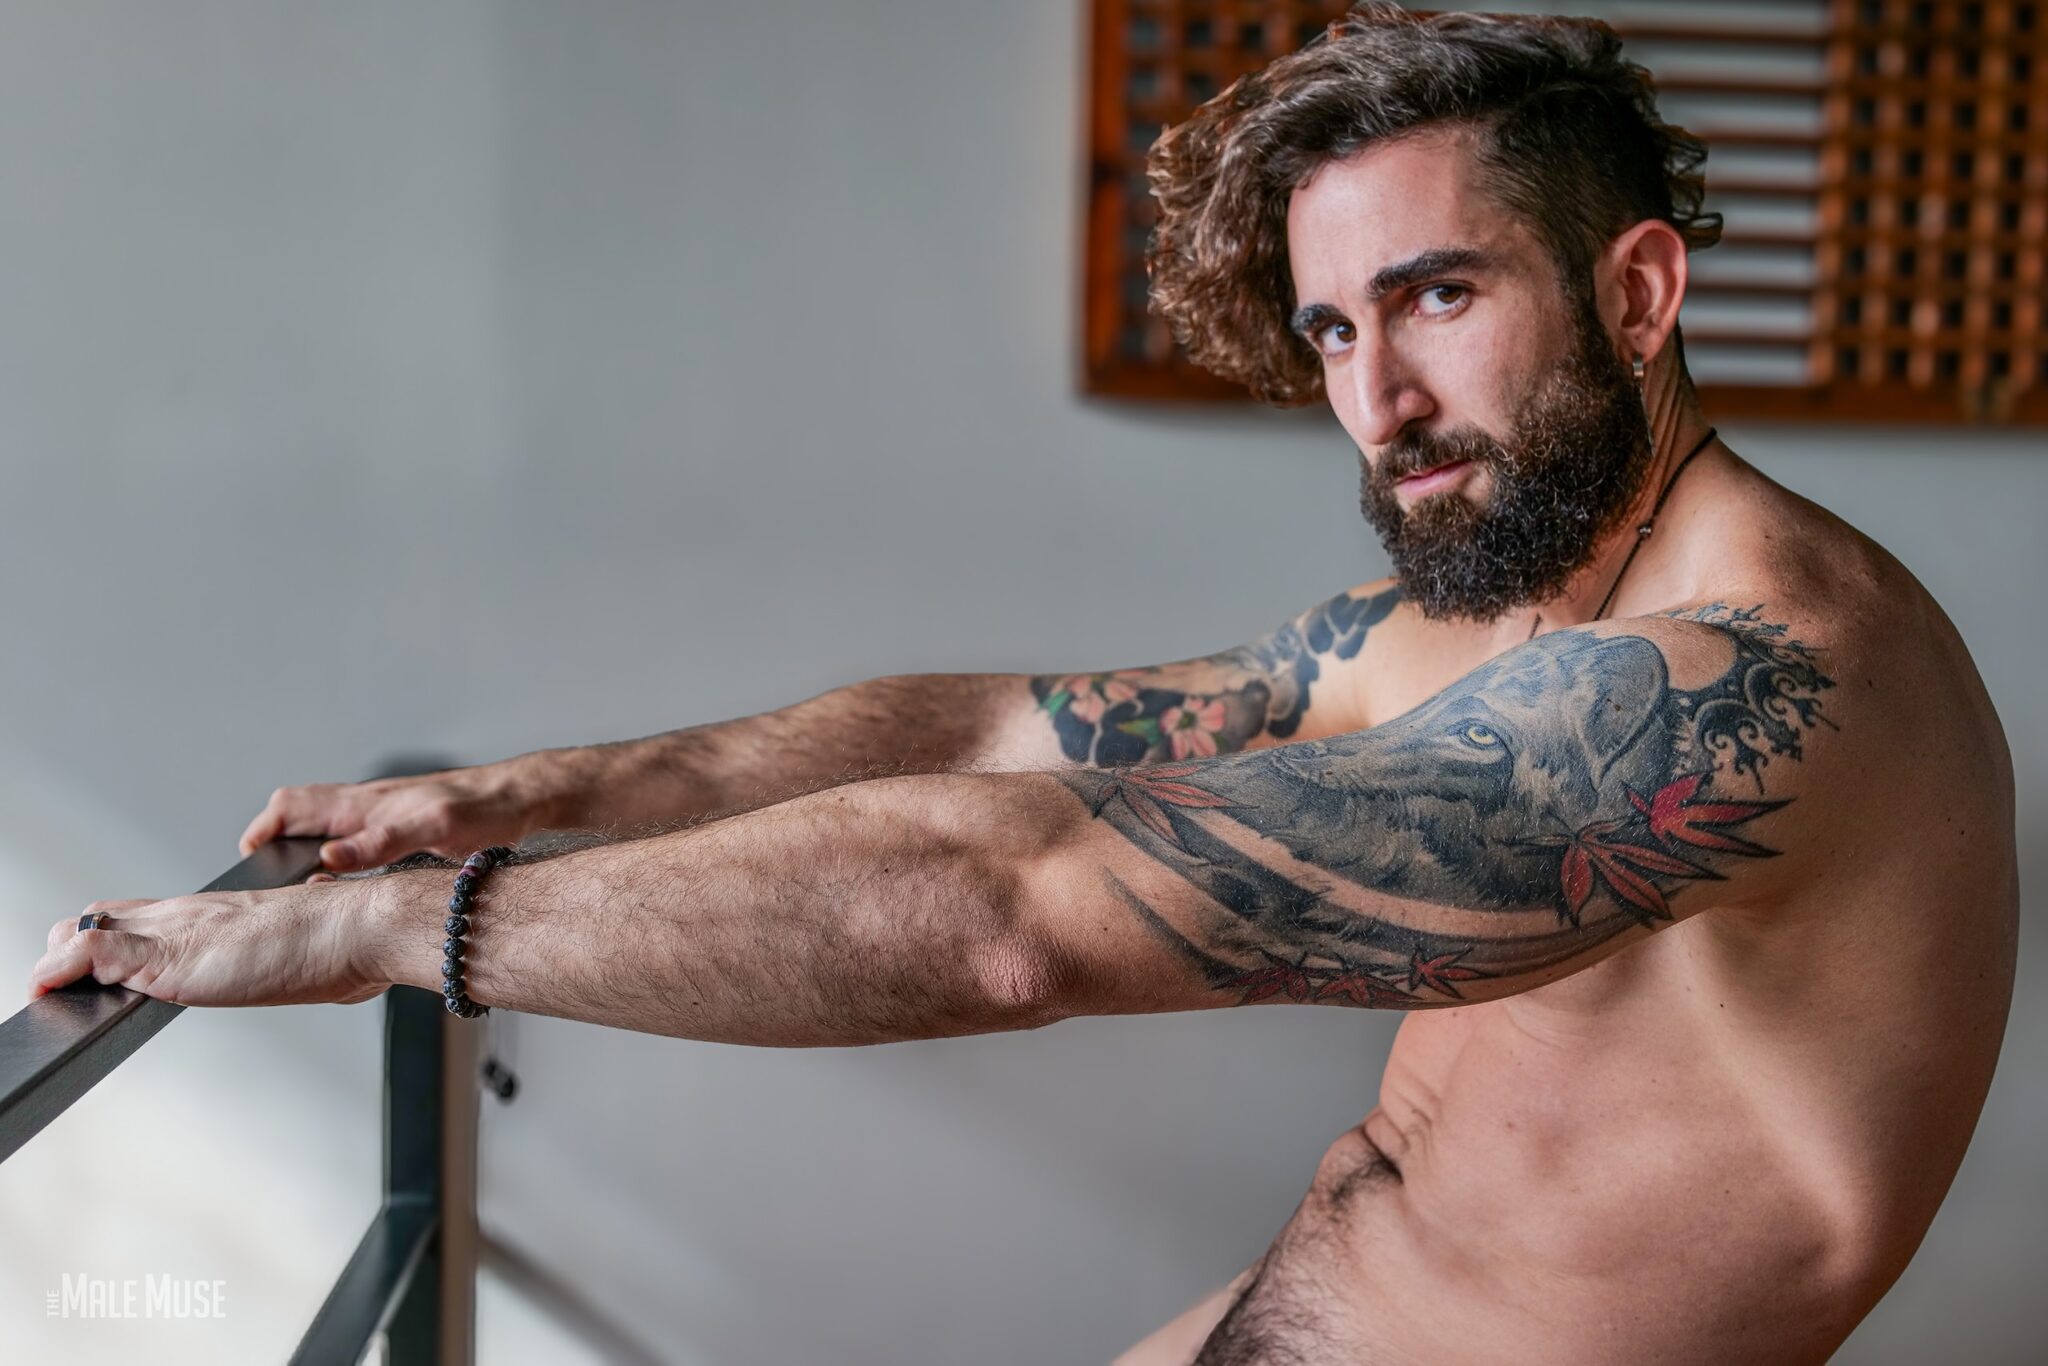 spanish hunk Oriol Lopez instagram:7kiba photographed by themalemuse man with beard